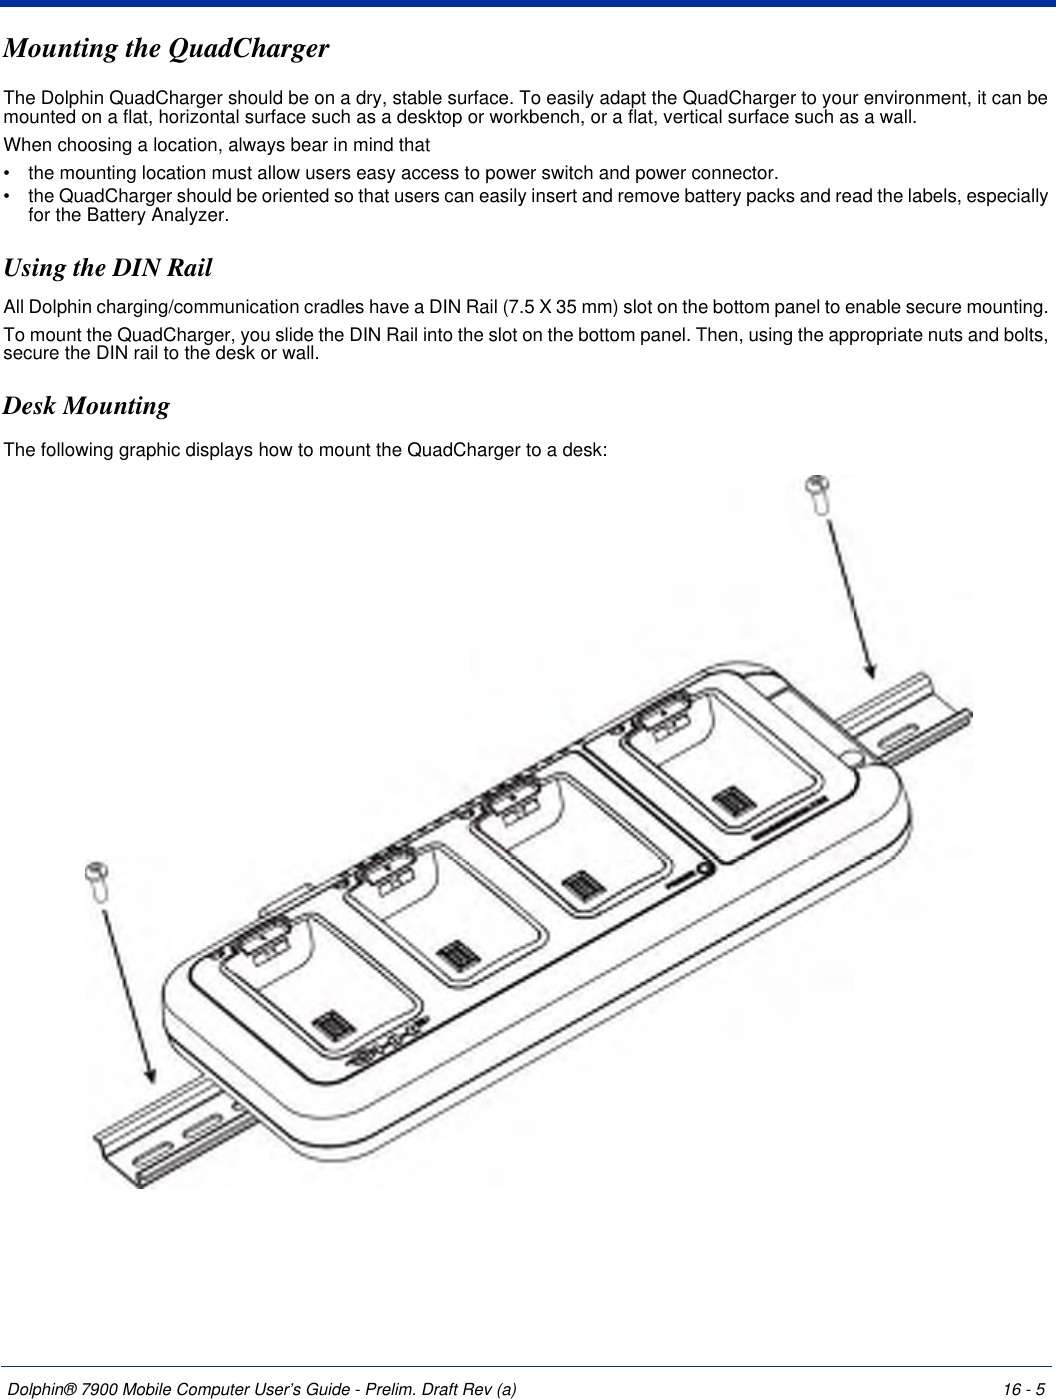 Dolphin® 7900 Mobile Computer User’s Guide - Prelim. Draft Rev (a) 16 - 5Mounting the QuadChargerThe Dolphin QuadCharger should be on a dry, stable surface. To easily adapt the QuadCharger to your environment, it can be mounted on a flat, horizontal surface such as a desktop or workbench, or a flat, vertical surface such as a wall. When choosing a location, always bear in mind that •           the mounting location must allow users easy access to power switch and power connector.•           the QuadCharger should be oriented so that users can easily insert and remove battery packs and read the labels, especially for the Battery Analyzer.Using the DIN RailAll Dolphin charging/communication cradles have a DIN Rail (7.5 X 35 mm) slot on the bottom panel to enable secure mounting. To mount the QuadCharger, you slide the DIN Rail into the slot on the bottom panel. Then, using the appropriate nuts and bolts, secure the DIN rail to the desk or wall.    Desk MountingThe following graphic displays how to mount the QuadCharger to a desk:    